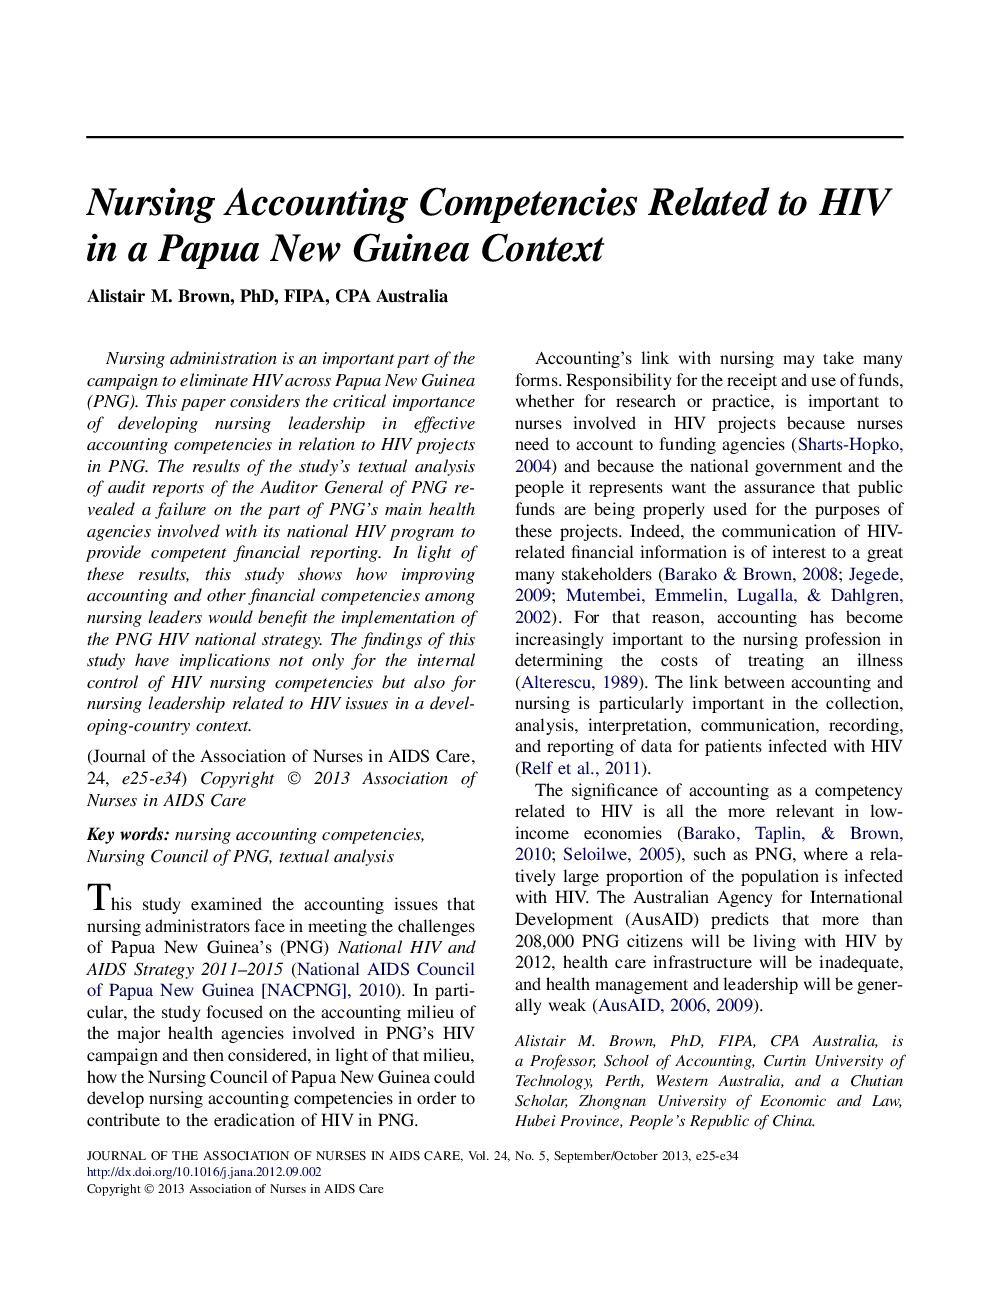 Nursing Accounting Competencies Related to HIV in a Papua New Guinea Context